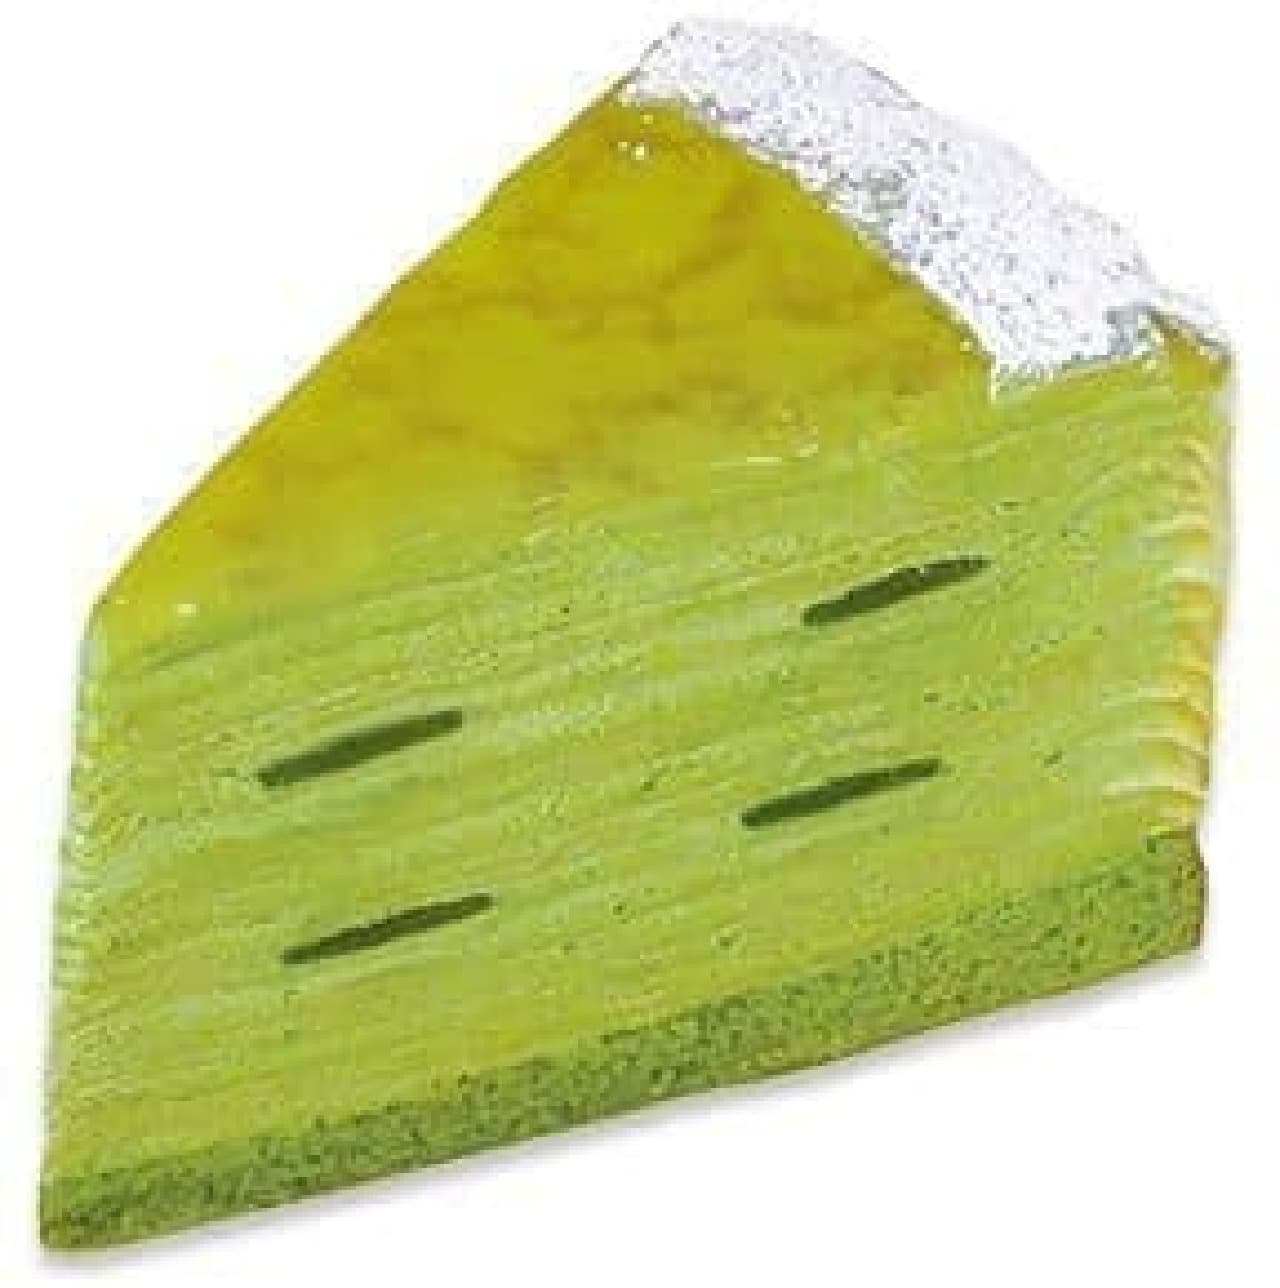 Fujiya pastry shop "Mille crêpes of matcha from Kagoshima prefecture"